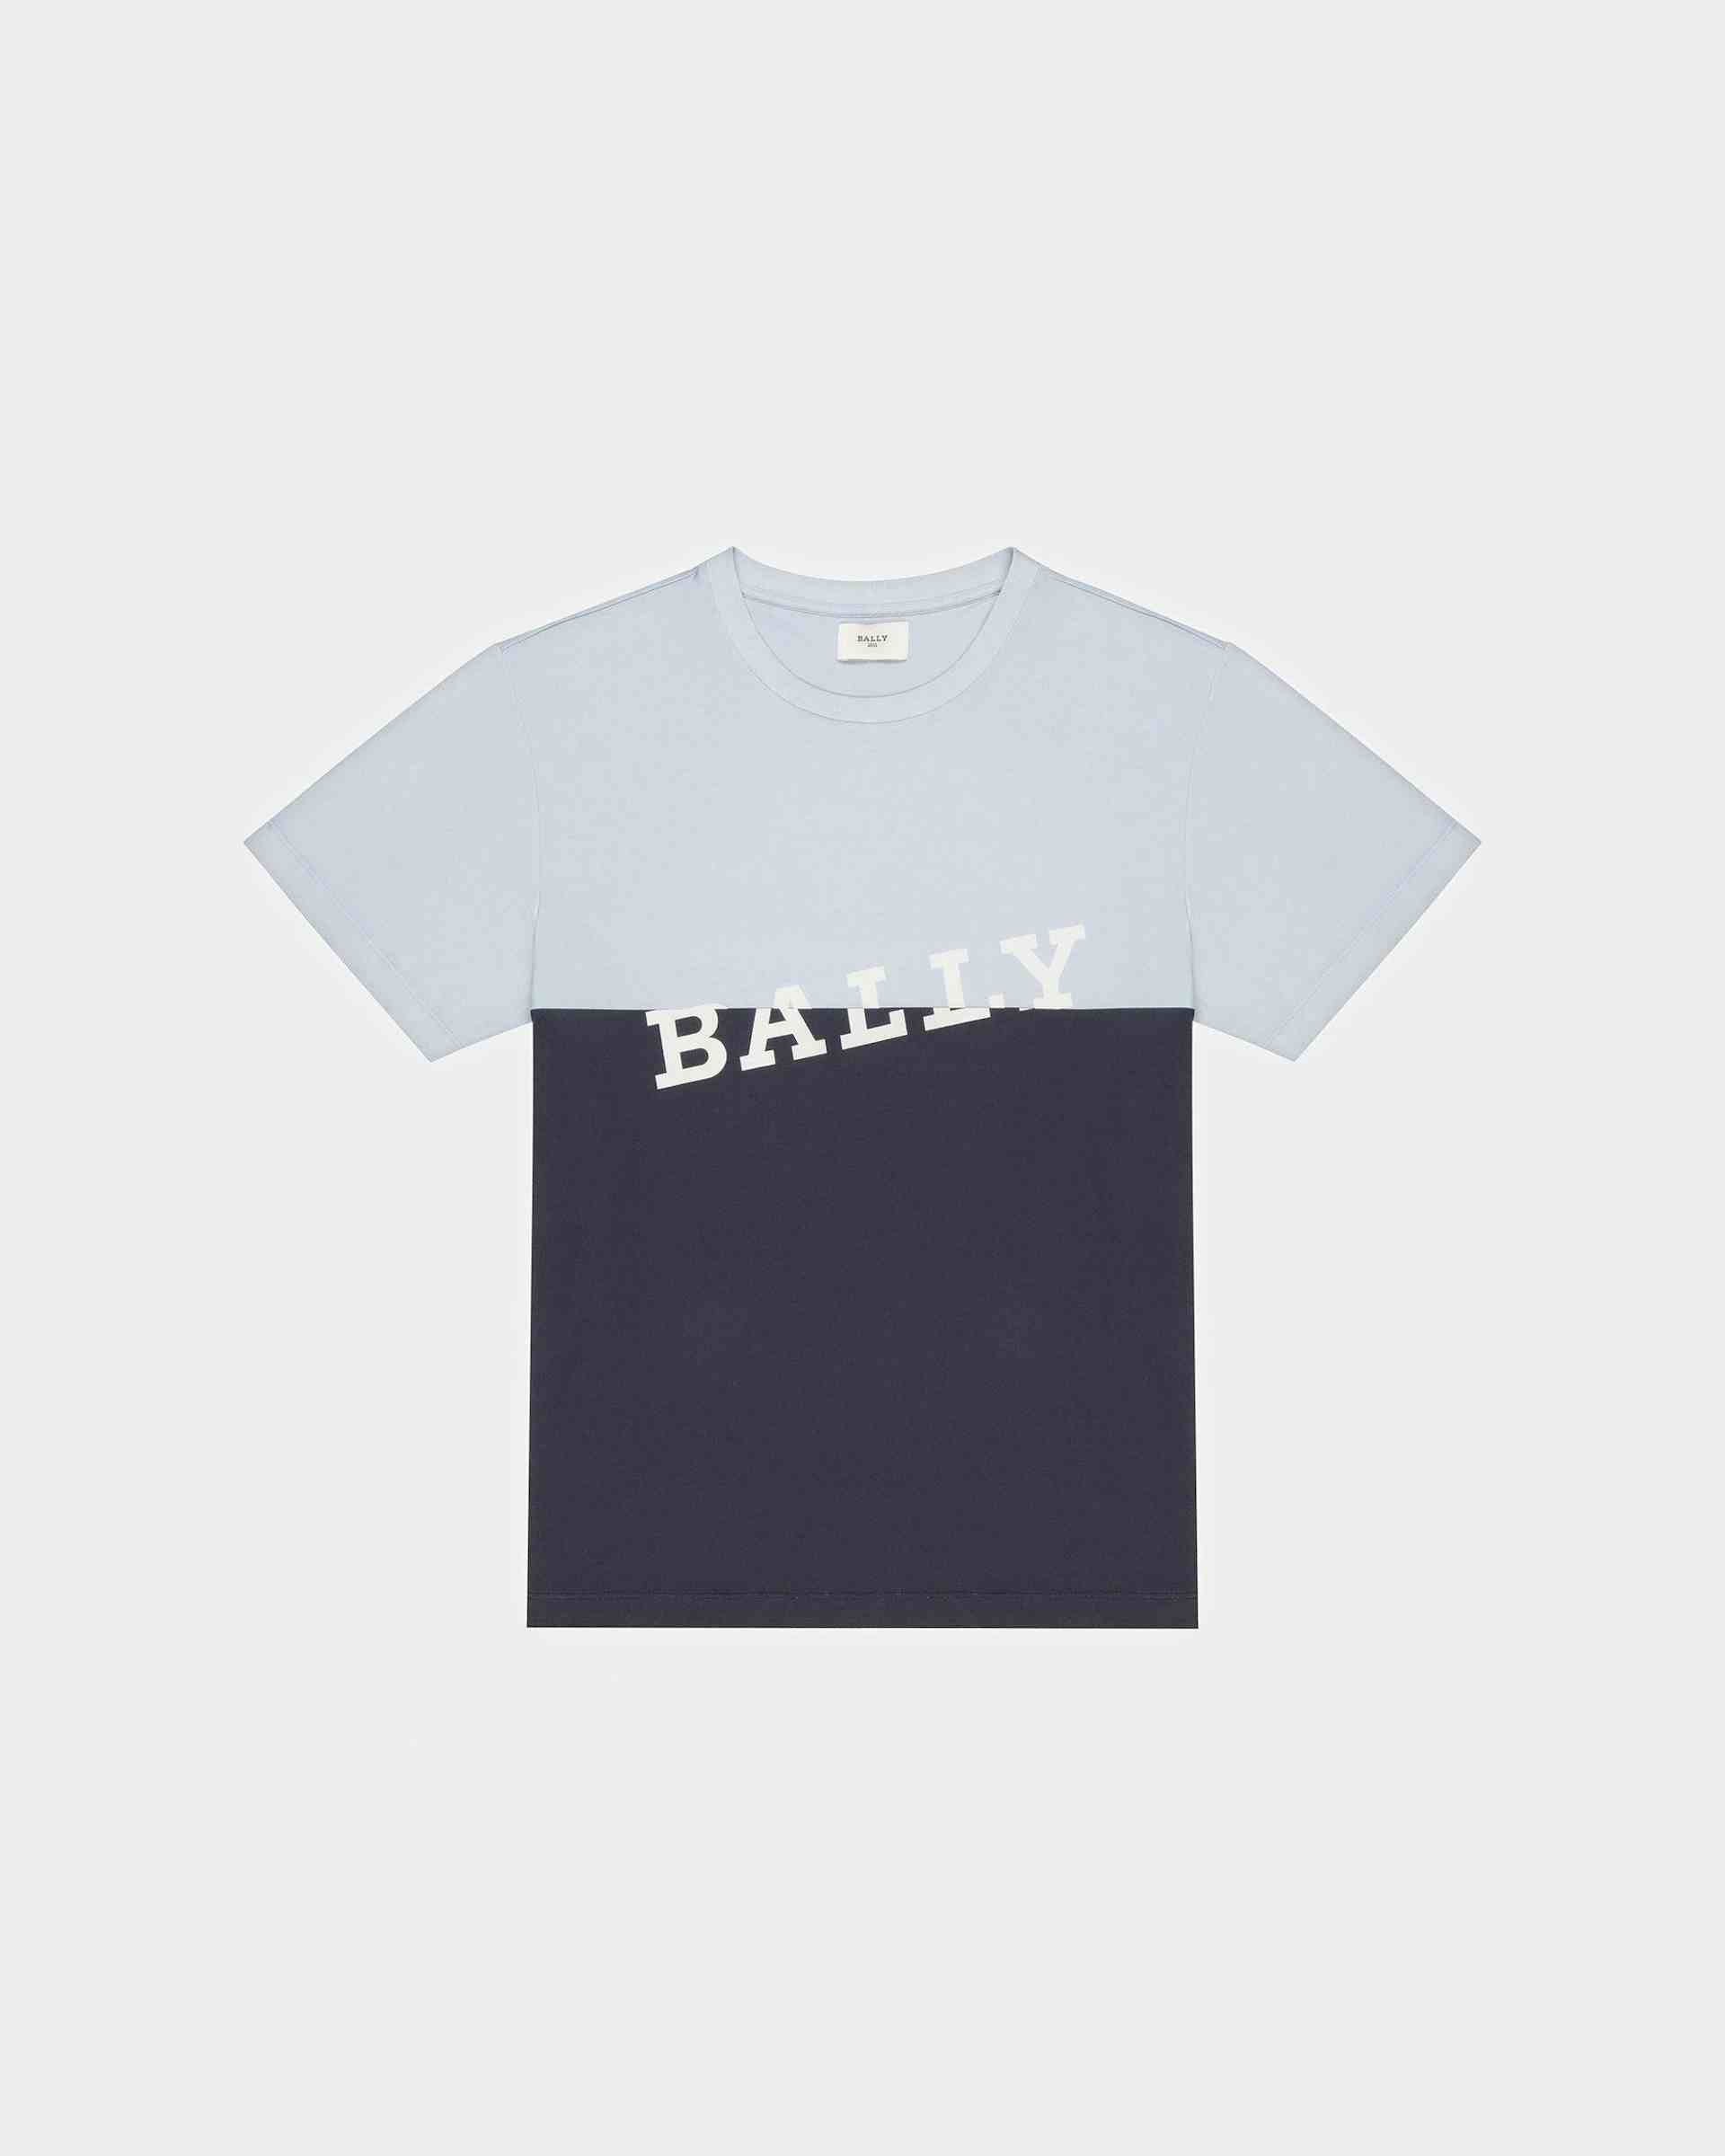 Cotton T-Shirt In Light Blue And Midnight Blue - Men's - Bally